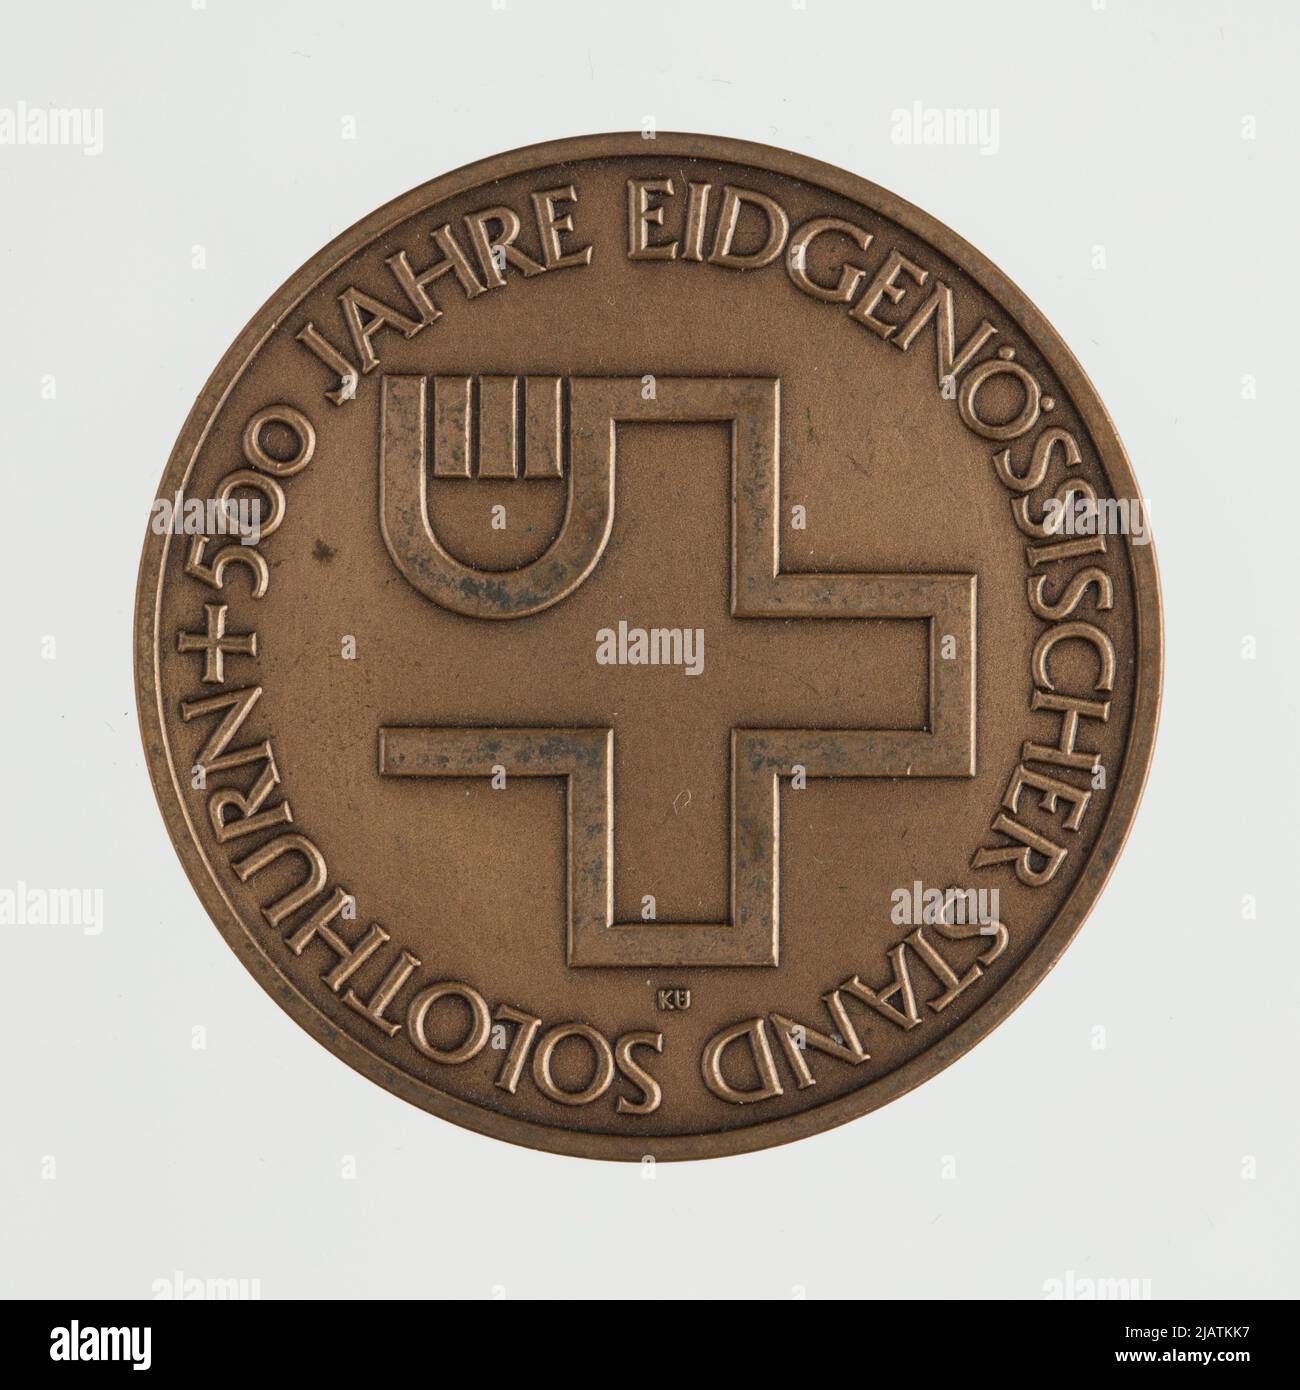 A medal commemorating 500 years of Solura canton in the Swiss Confederation Huguenin Stock Photo